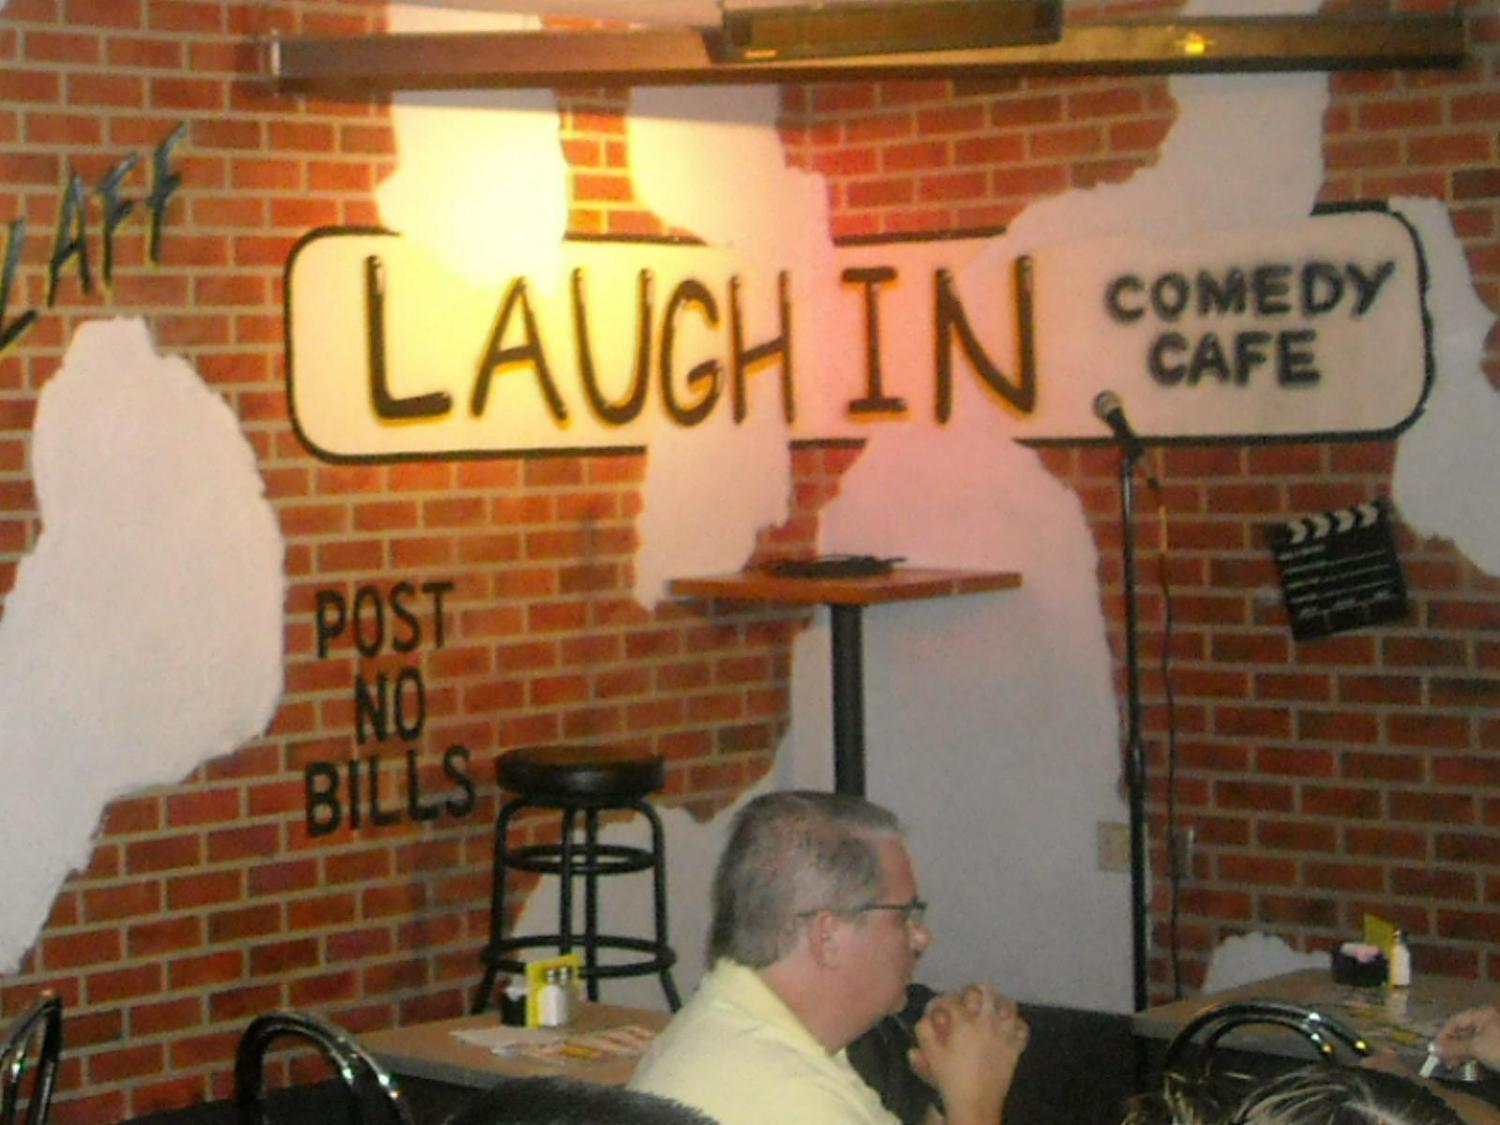 Free Comedy Club tickets for Meetup members .